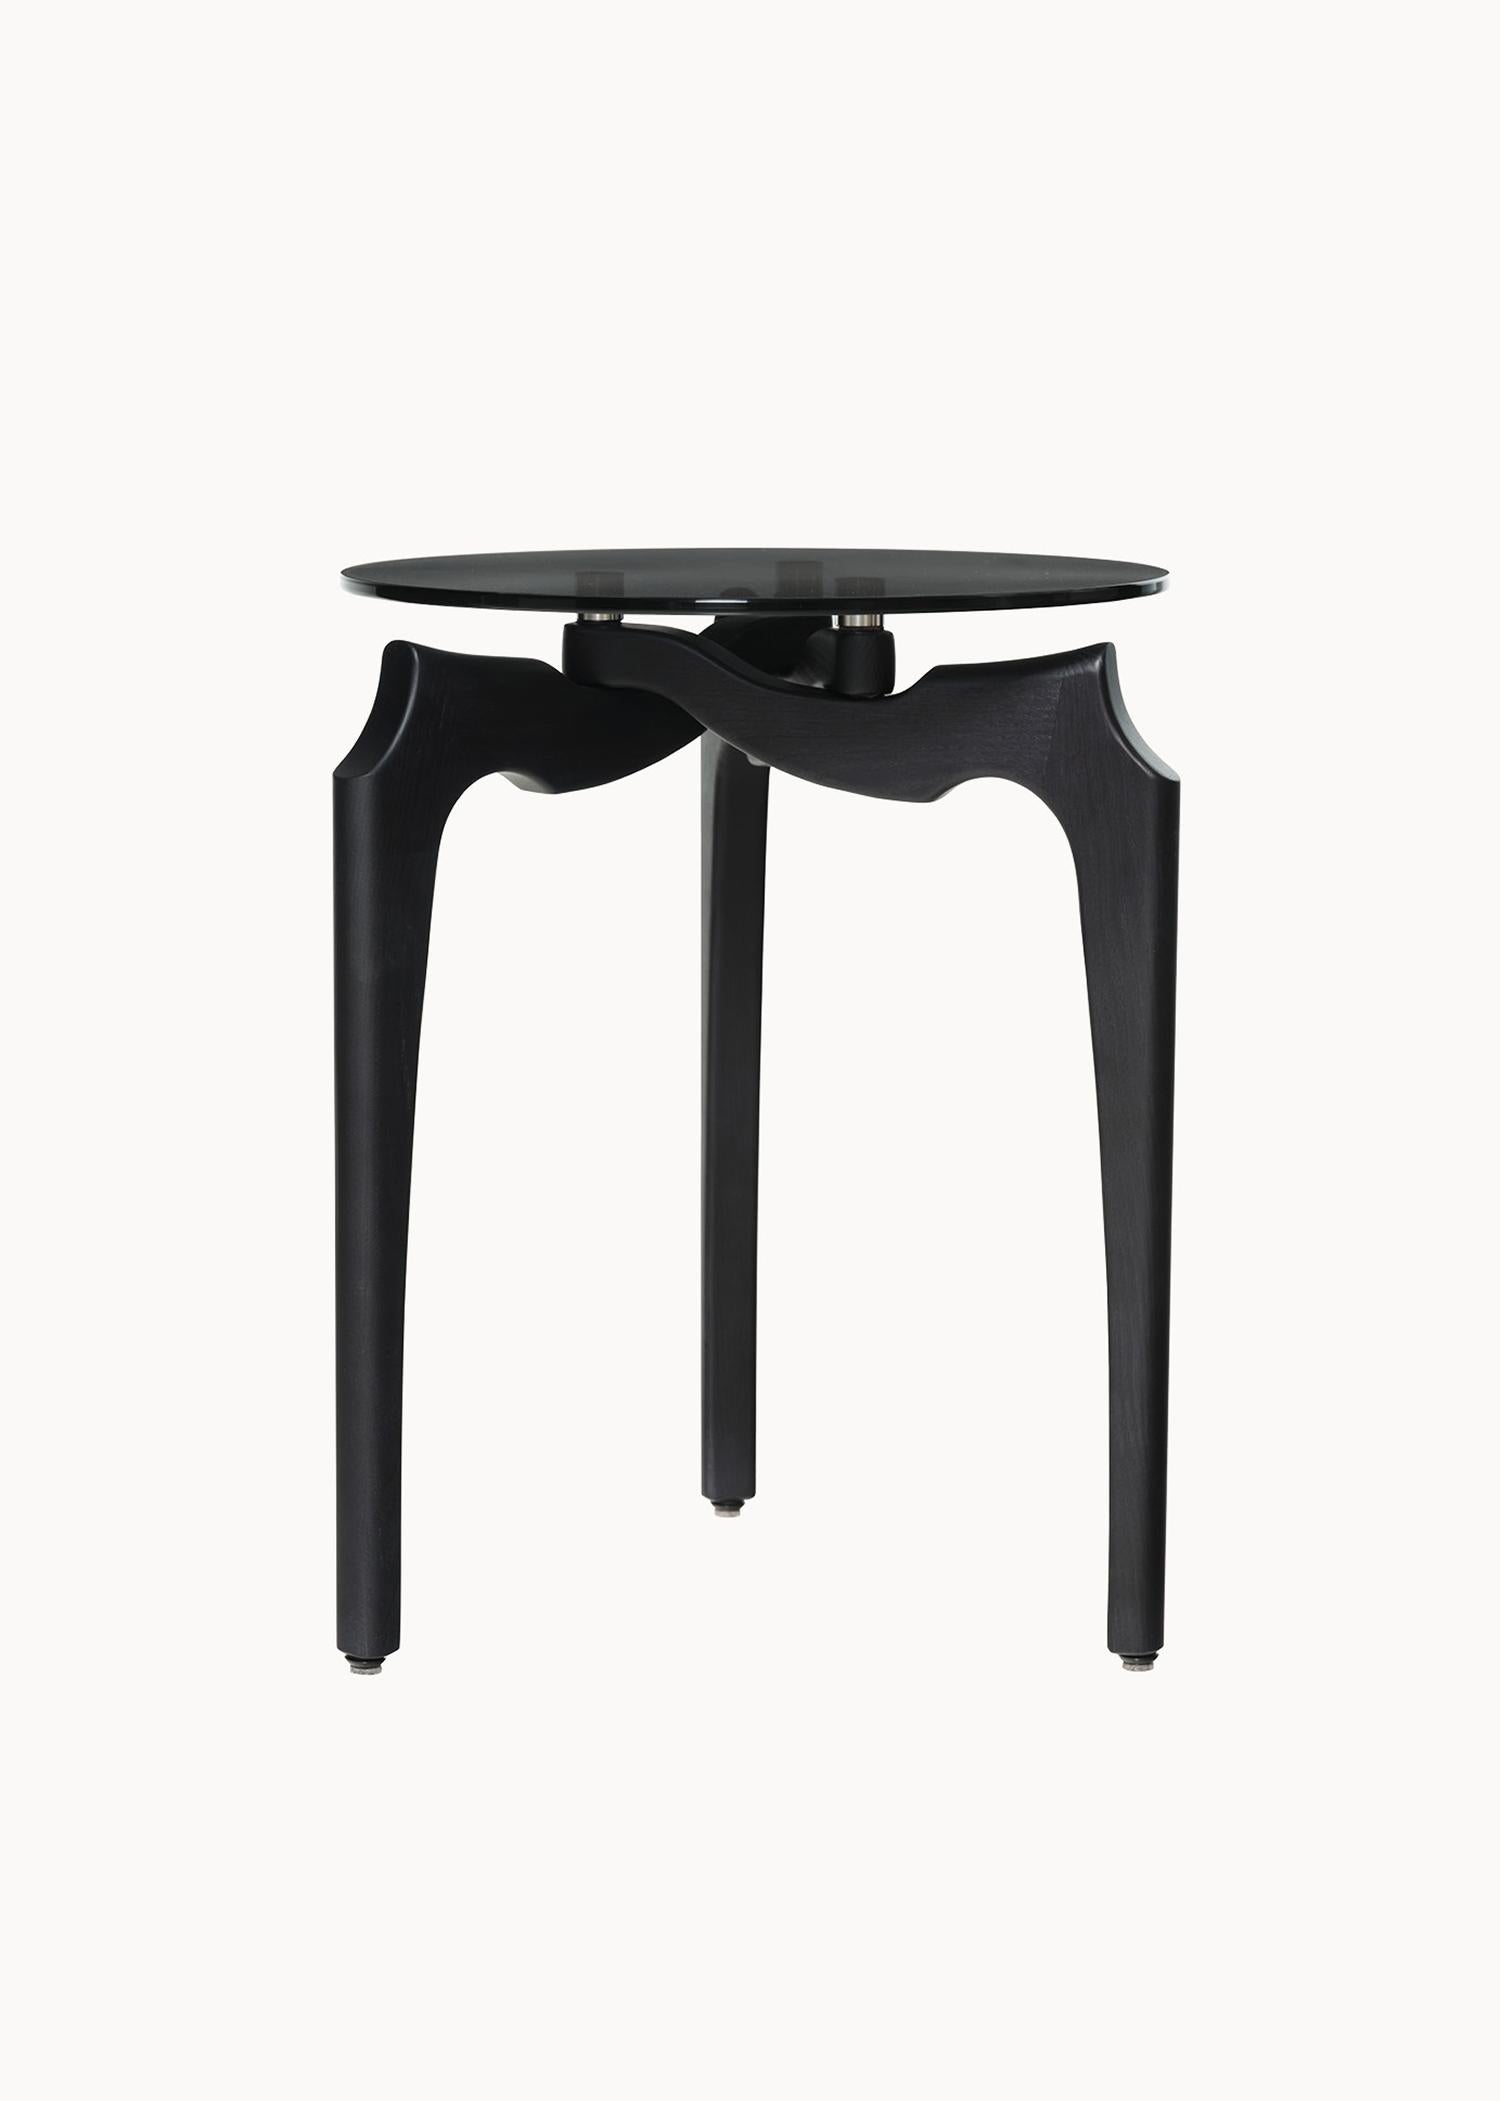 Carlina Side Table by Oscar Tusquets
Dimensions: Ø 40 x H 50 cm.
Materials: Solid ash timber and tempered smoked glass.

Solid ash timber structure, stained black. 1 cm thick tempered smoked glass top.

Gaulino Family
Distinctive elements of